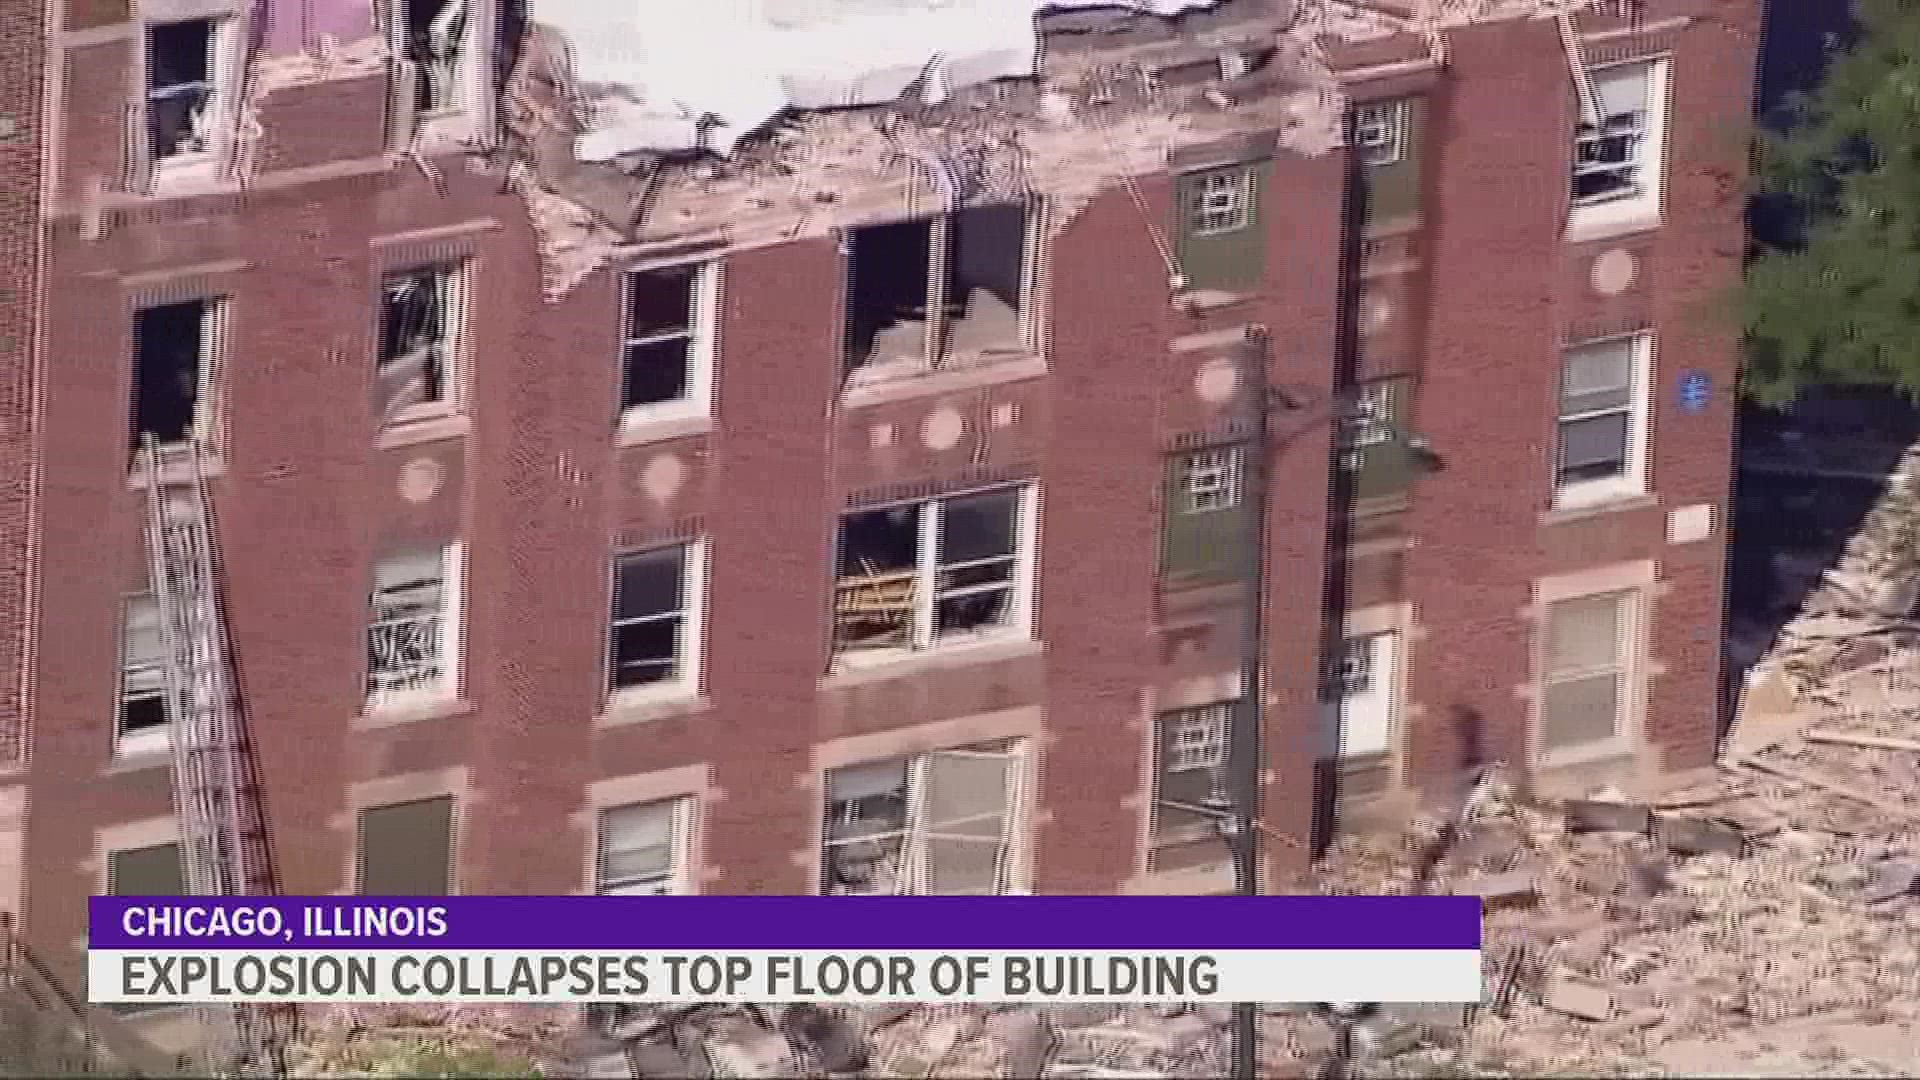 Photos show most of the top floor was destroyed, with rubble falling to the street and crushing a car.